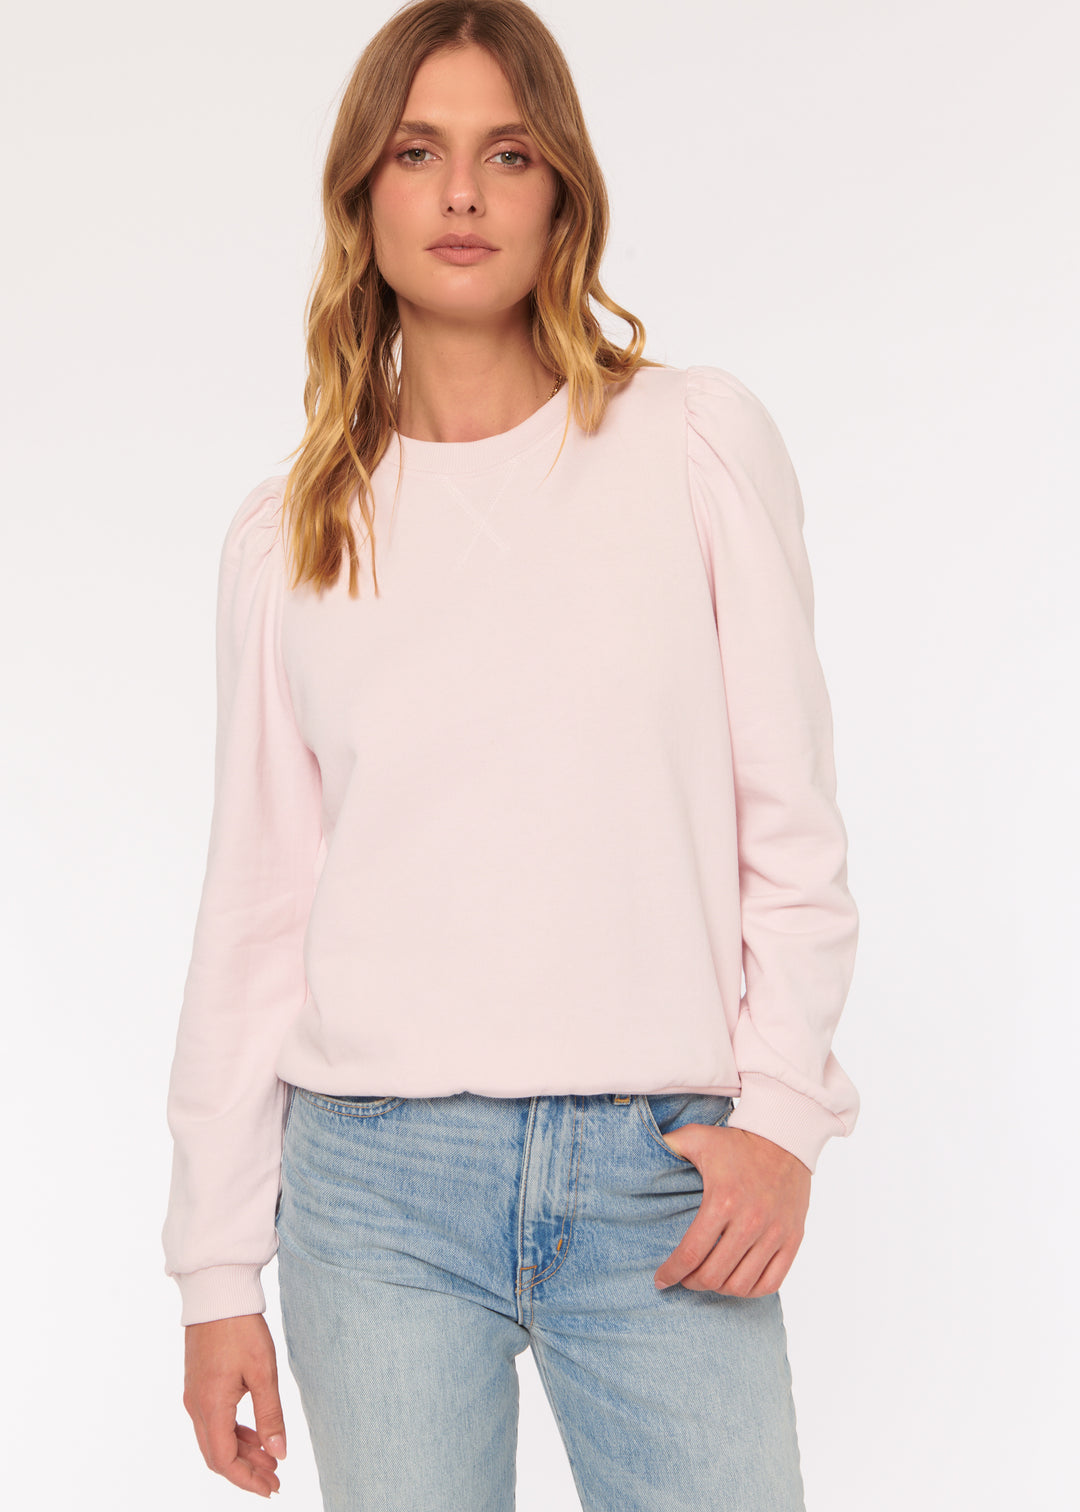 Cami NYC - Lilah Sweatshirt in Frosting